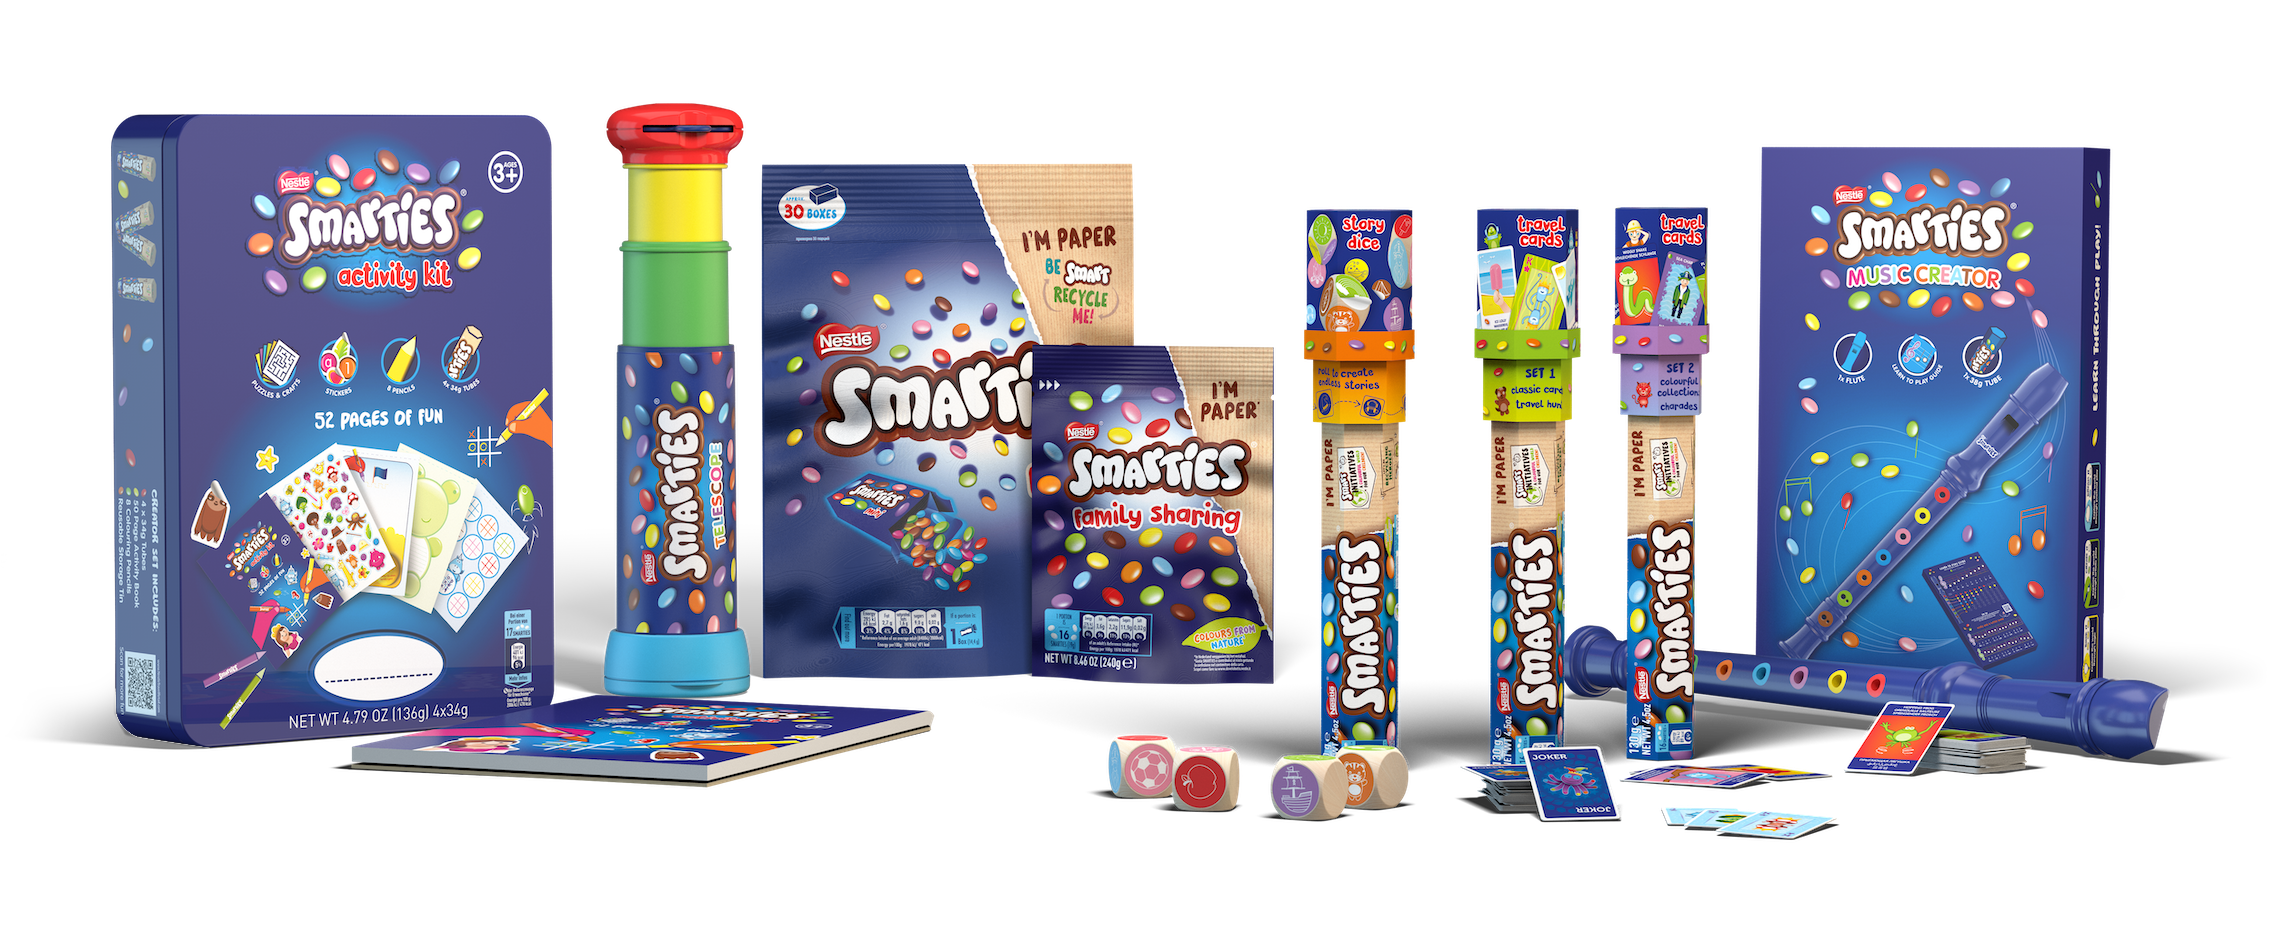 The Smarties Toppers product range